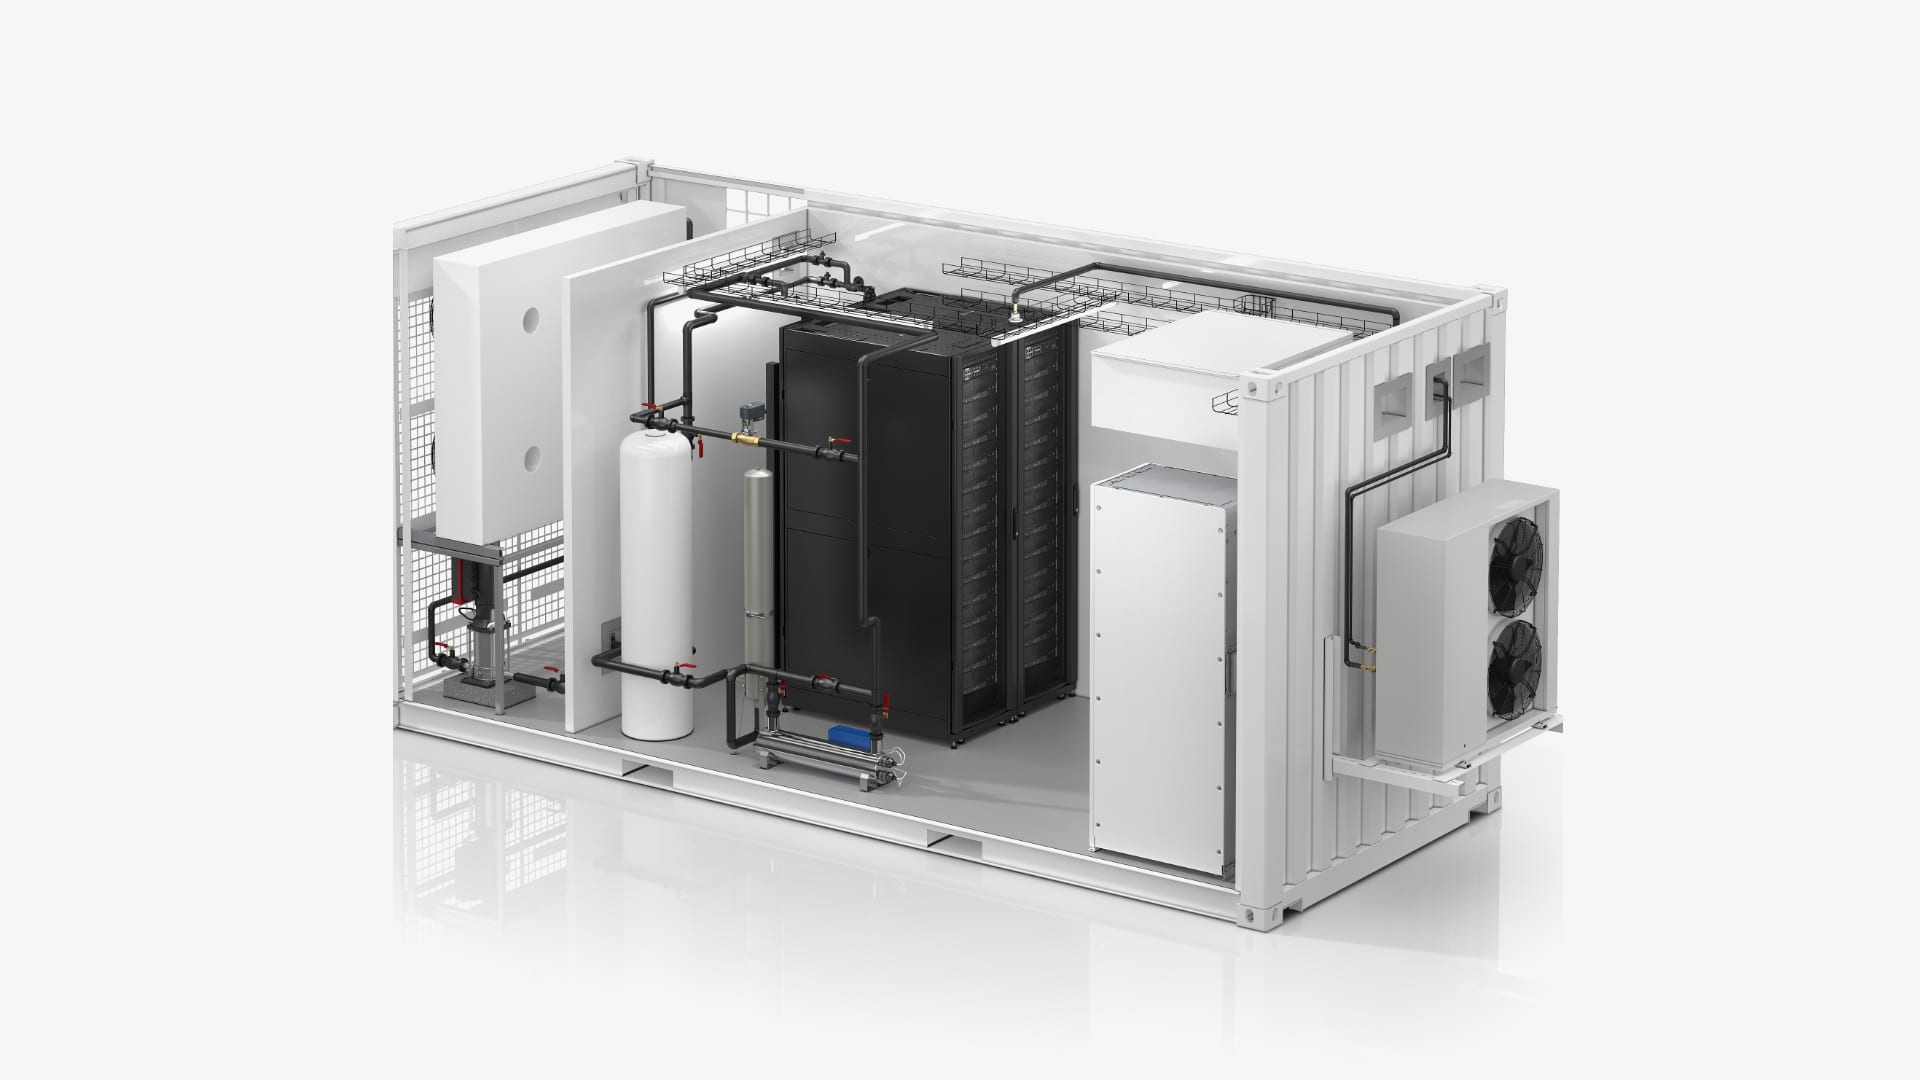 Schneider Electric Announces Industry-First, All-In-One Liquid Cooled, EcoStruxure™ Modular Data Center